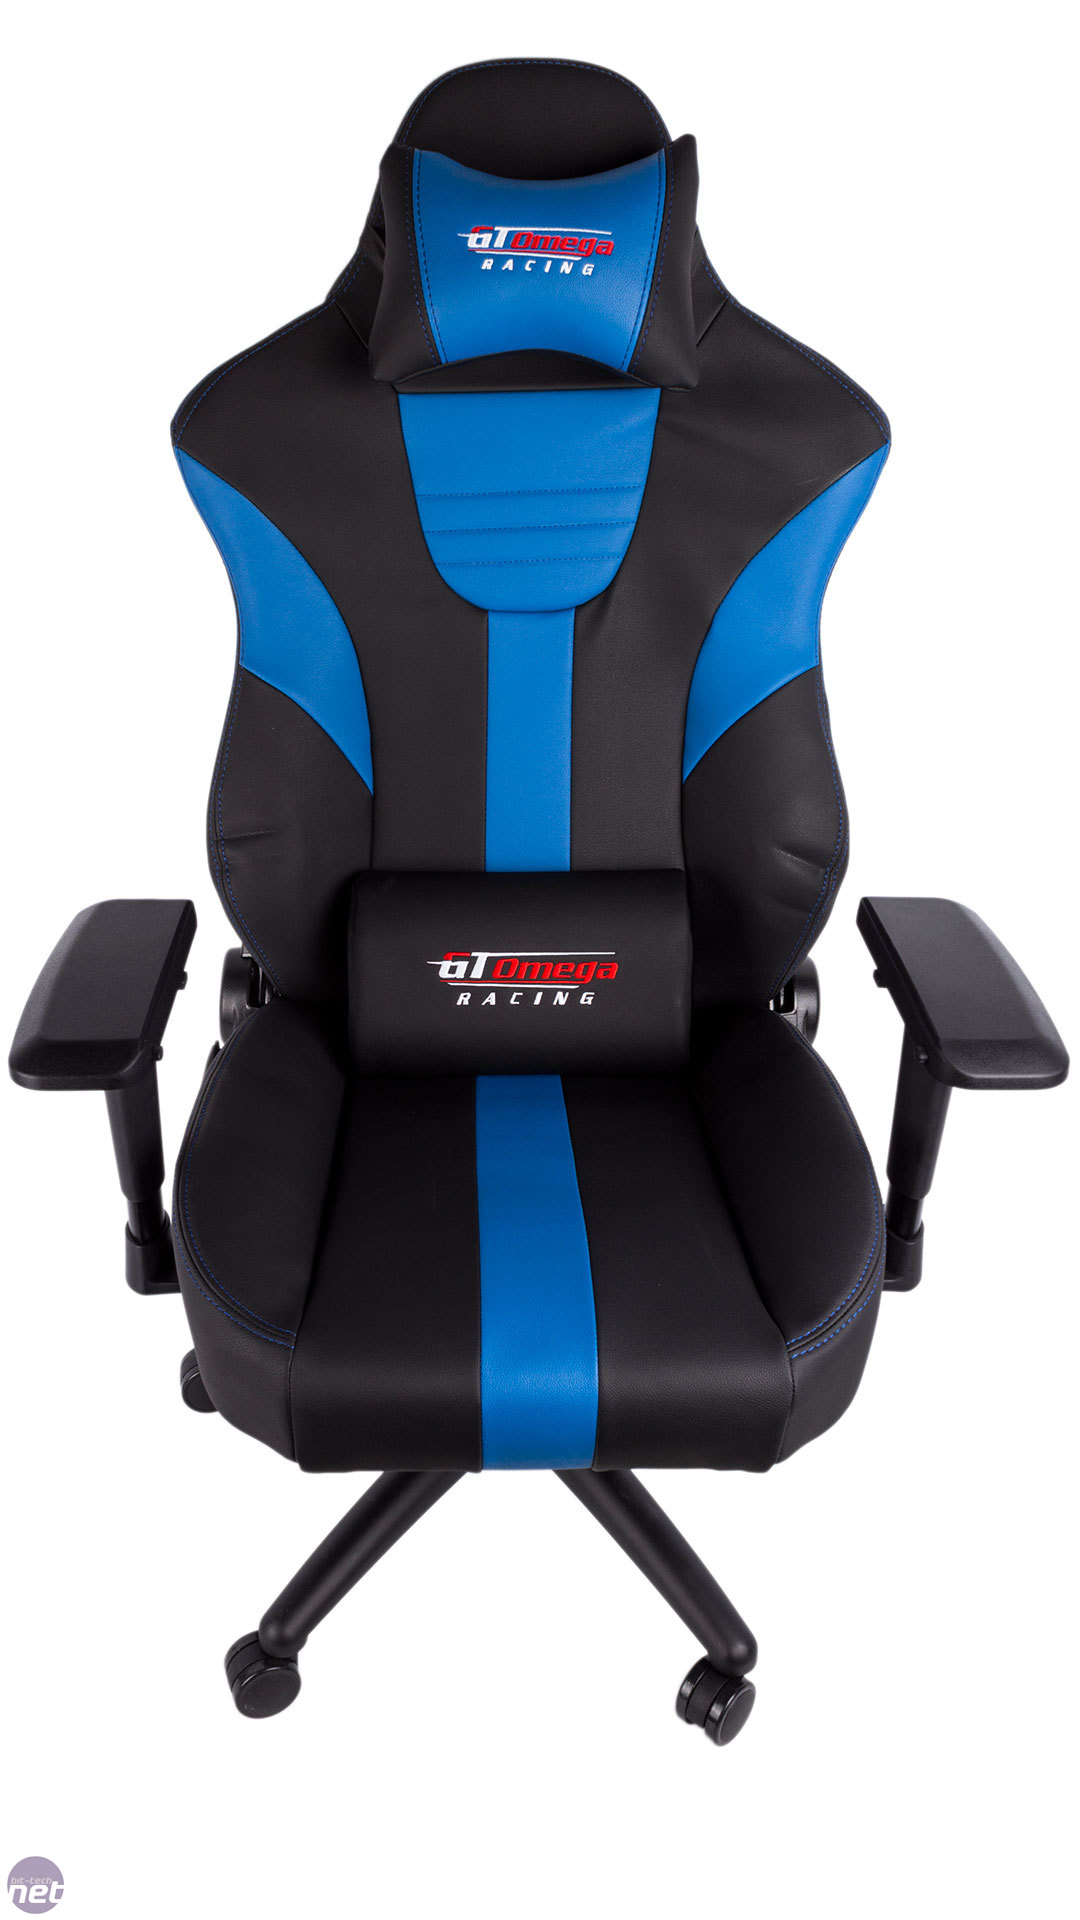 gt omega racing gaming chair